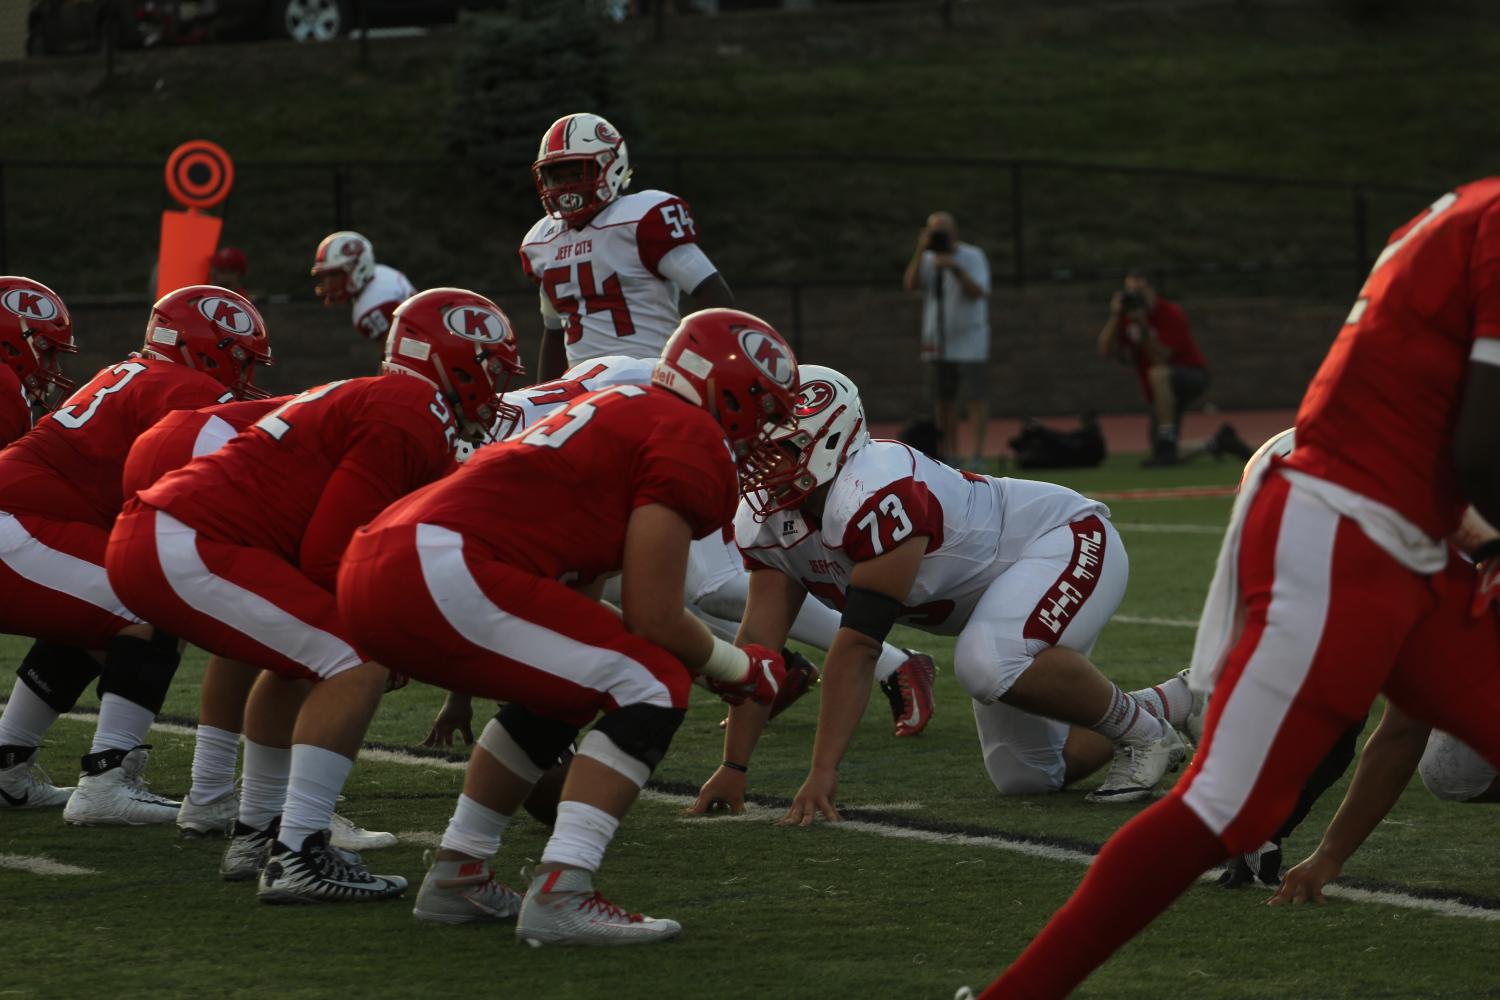 KHS varsity football take their starting positions at their first home game vs. Jefferson City, Aug. 25th. 